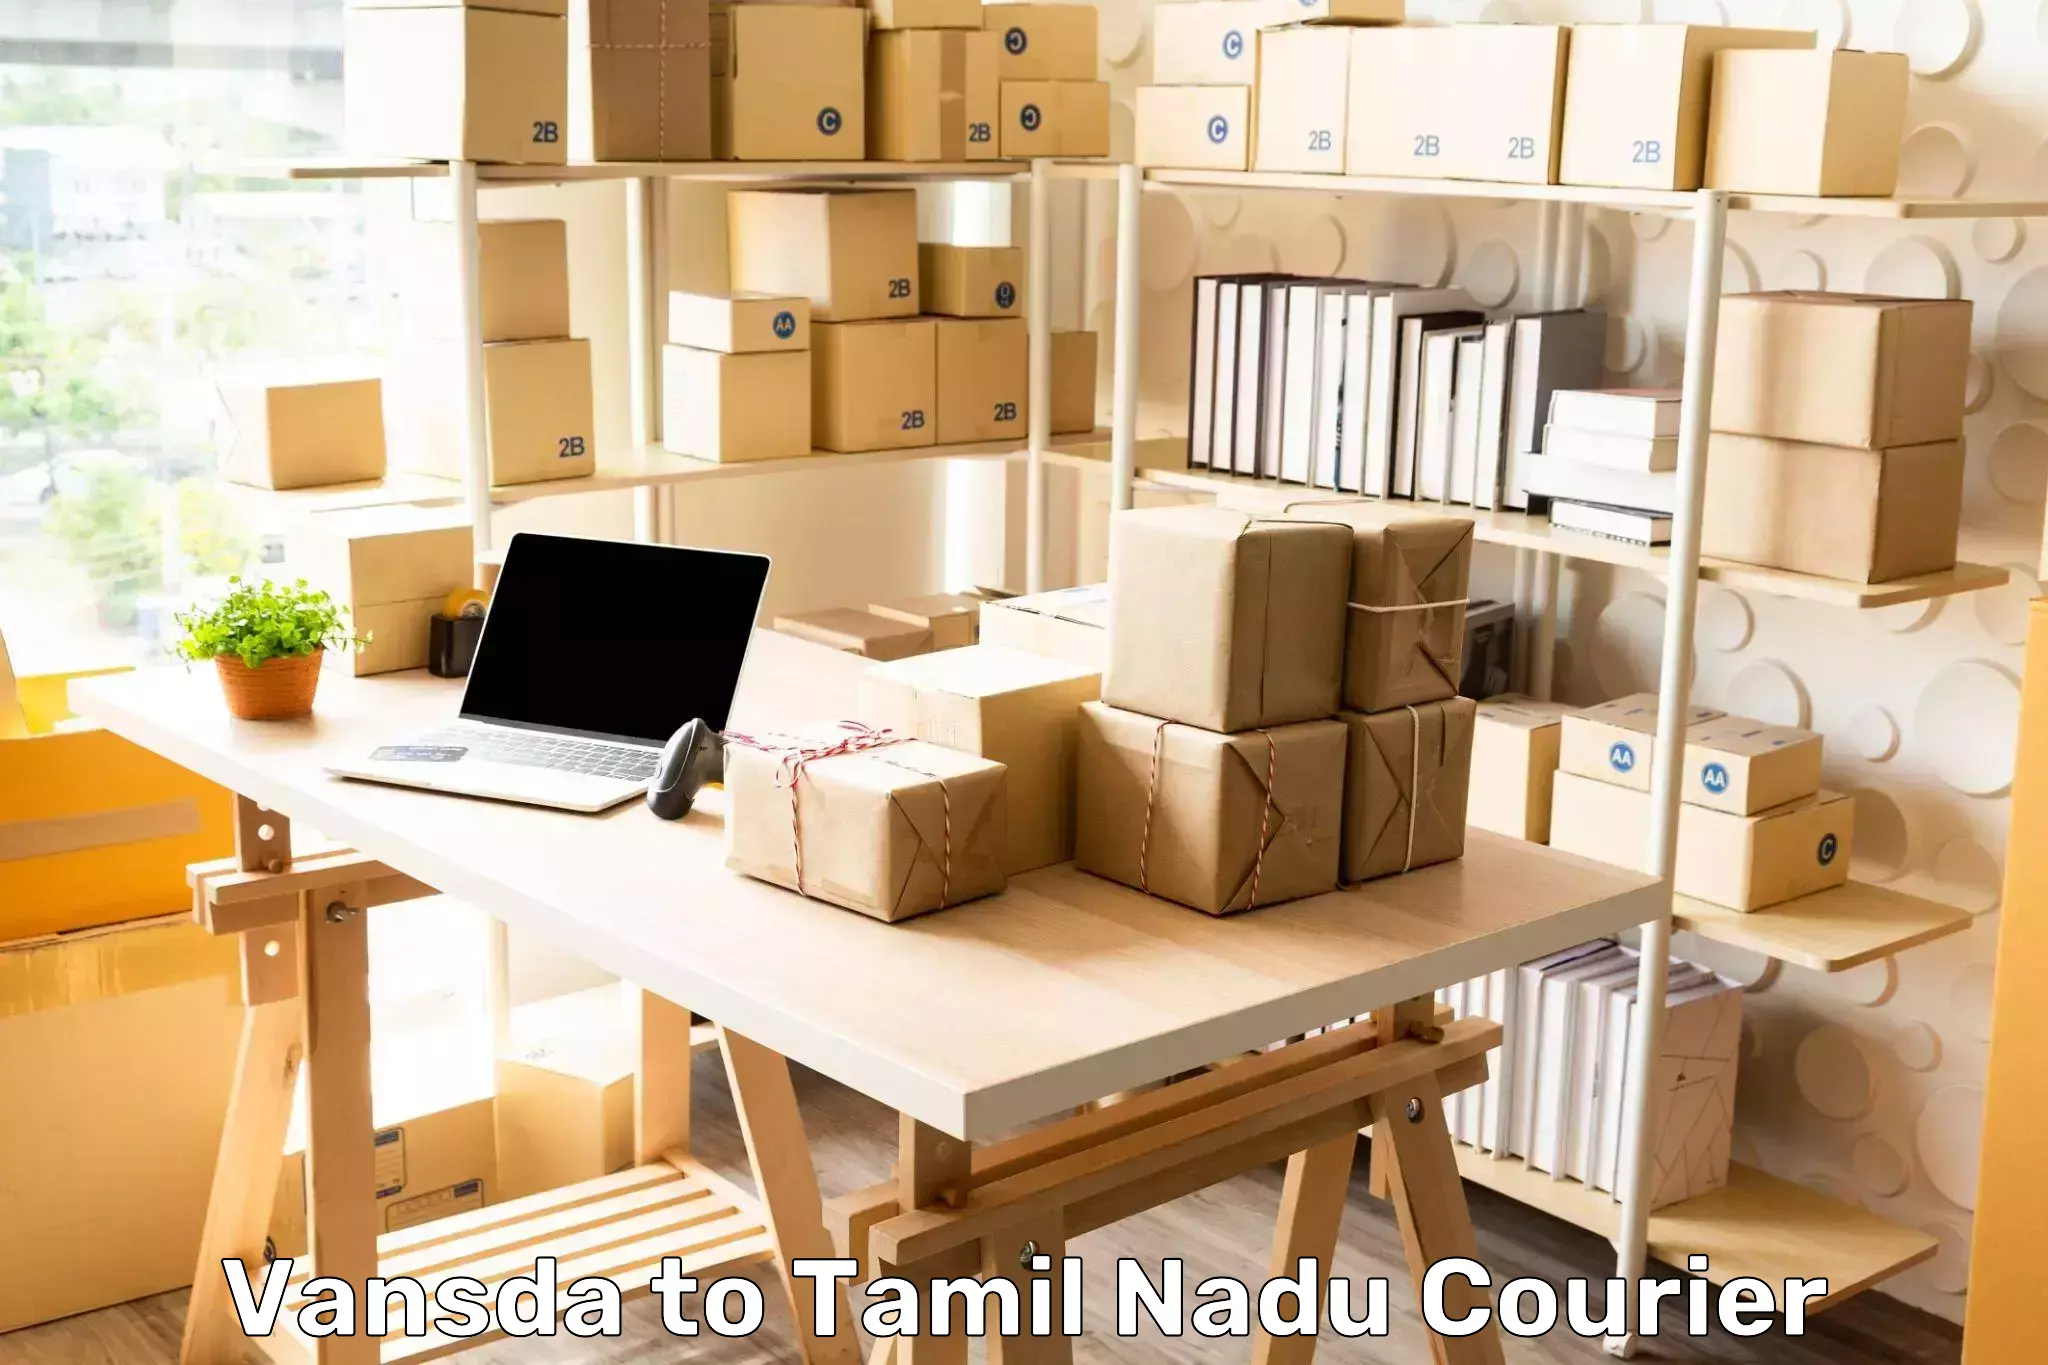 International courier rates Vansda to Vellore Institute of Technology